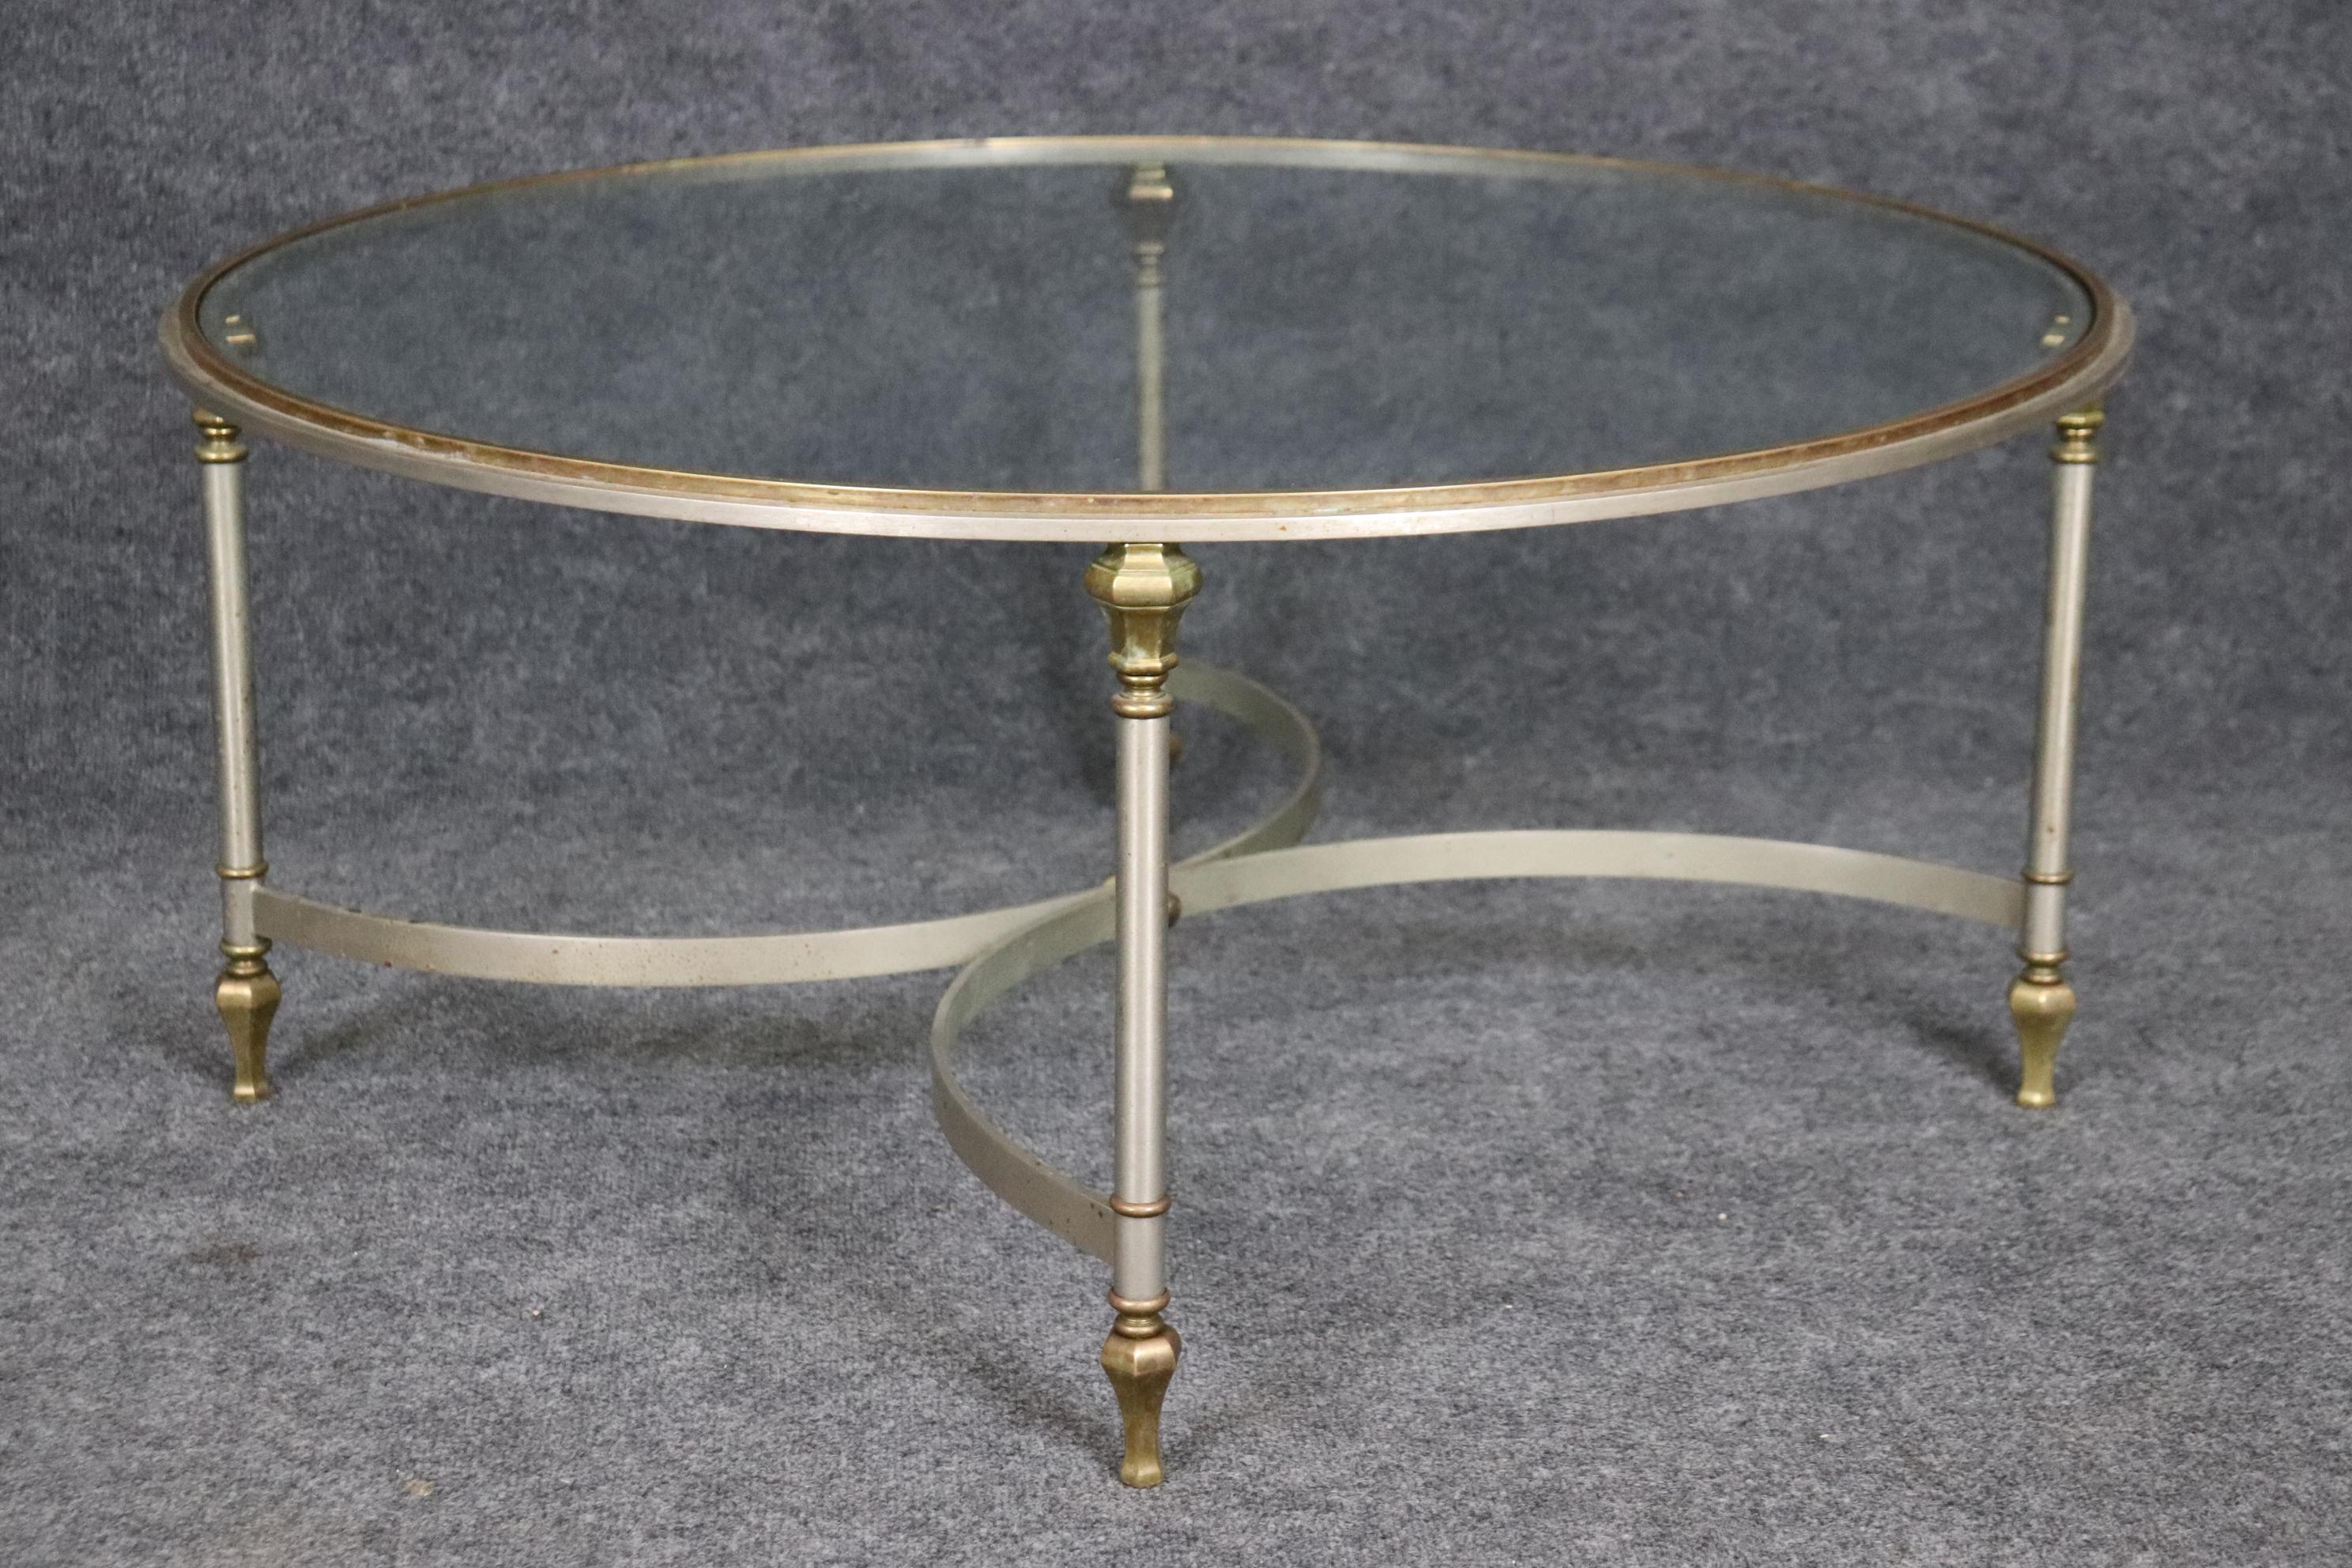 Dimensions- H: 17 1/4in W: 37 3/4in D: 37 3/4in 

This vintage Regency Maison Jansen style glass top coffee table is unique and  bound to bring a sense of sophistication and character into your home or place of choosing! This piece is made of the